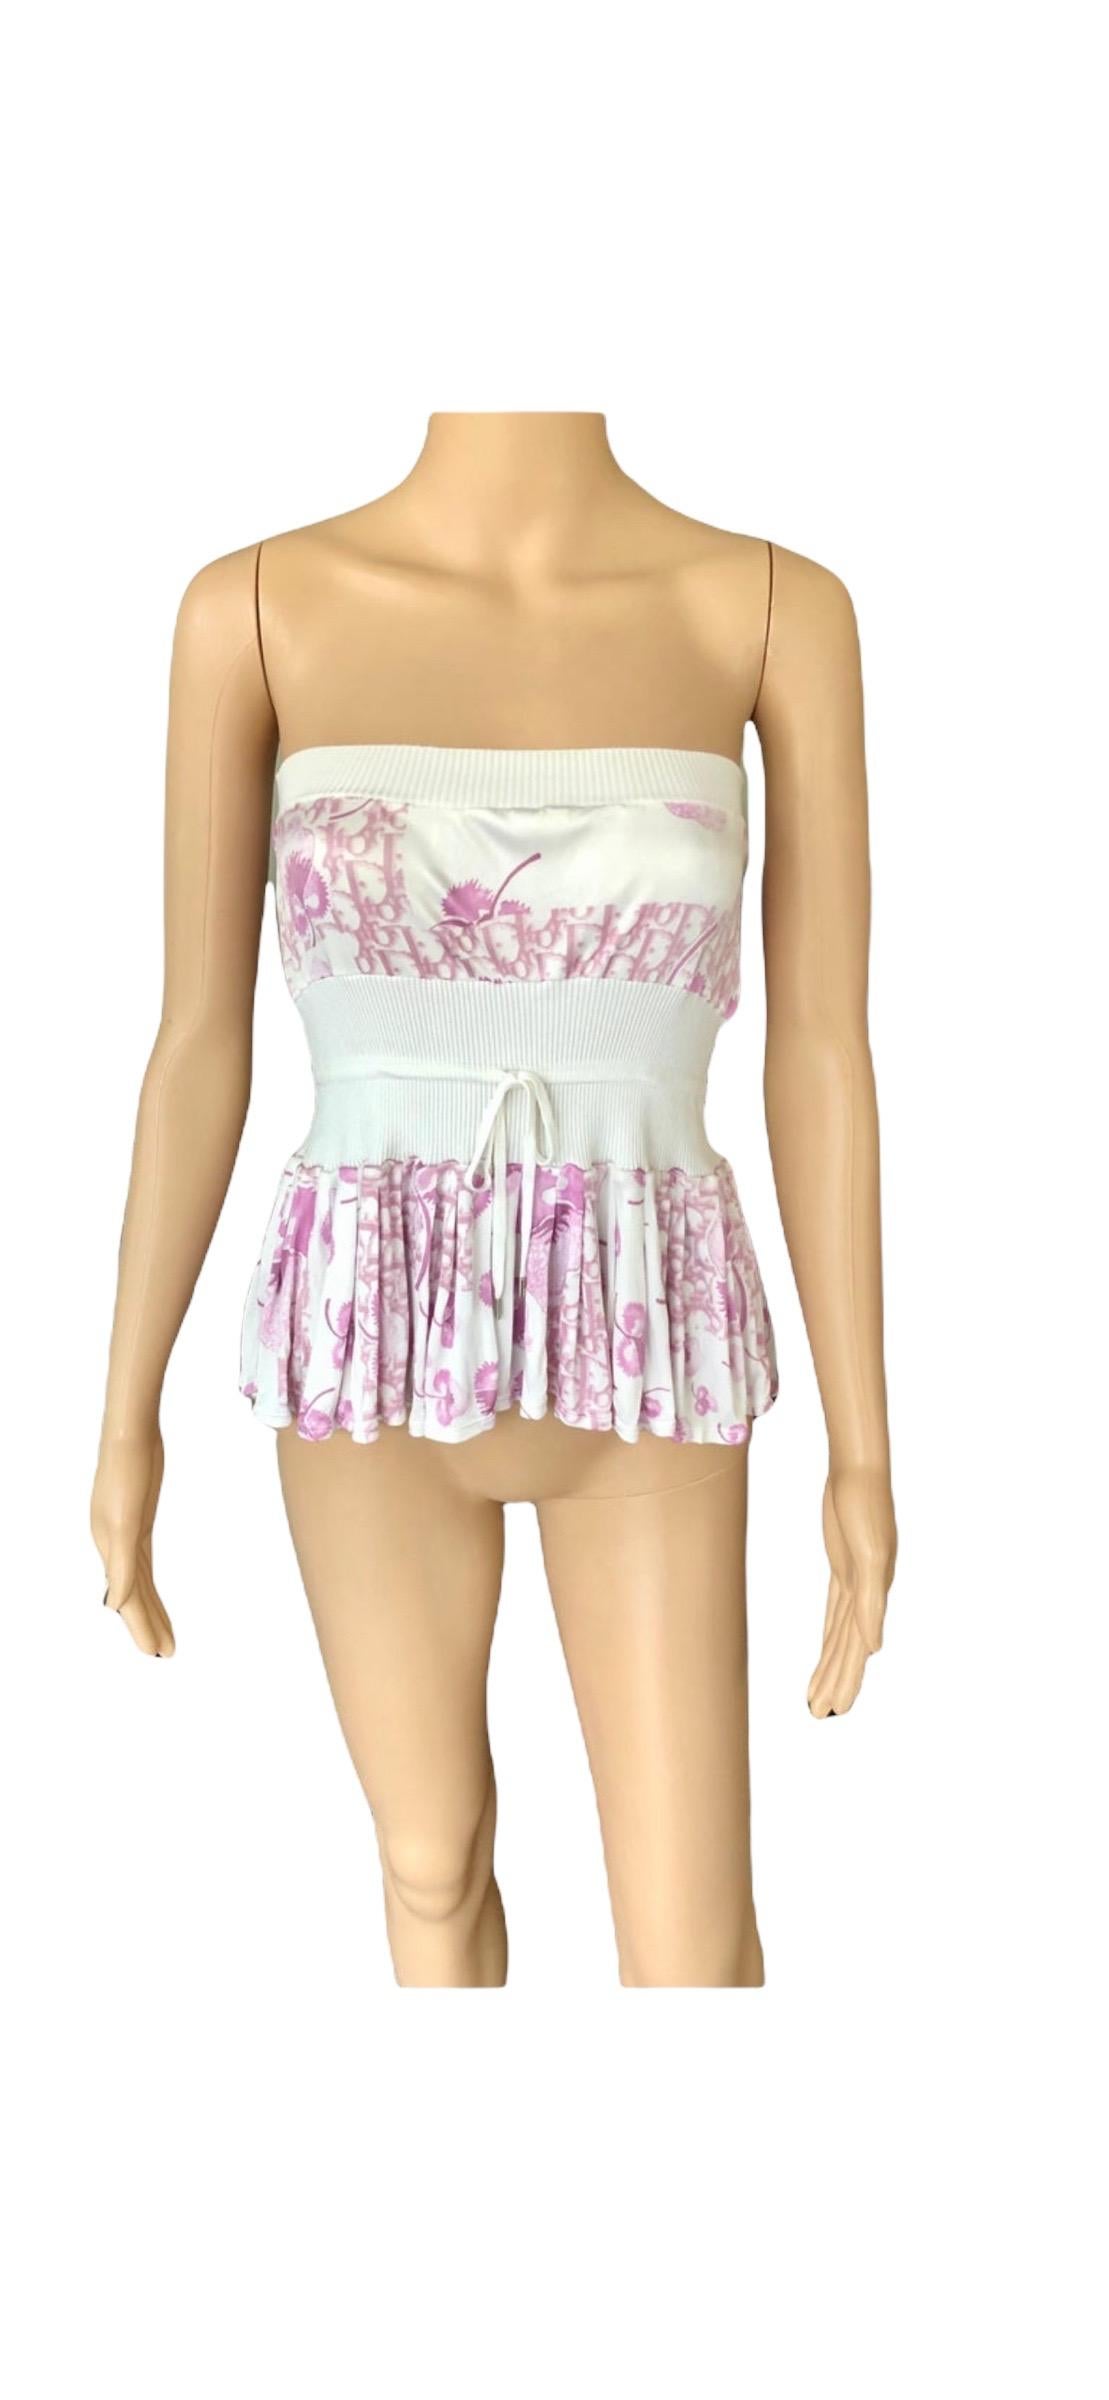 Christian Dior By John Galliano Resort 2005 Cherry Blossom Monogram Logo Top In Good Condition For Sale In Naples, FL